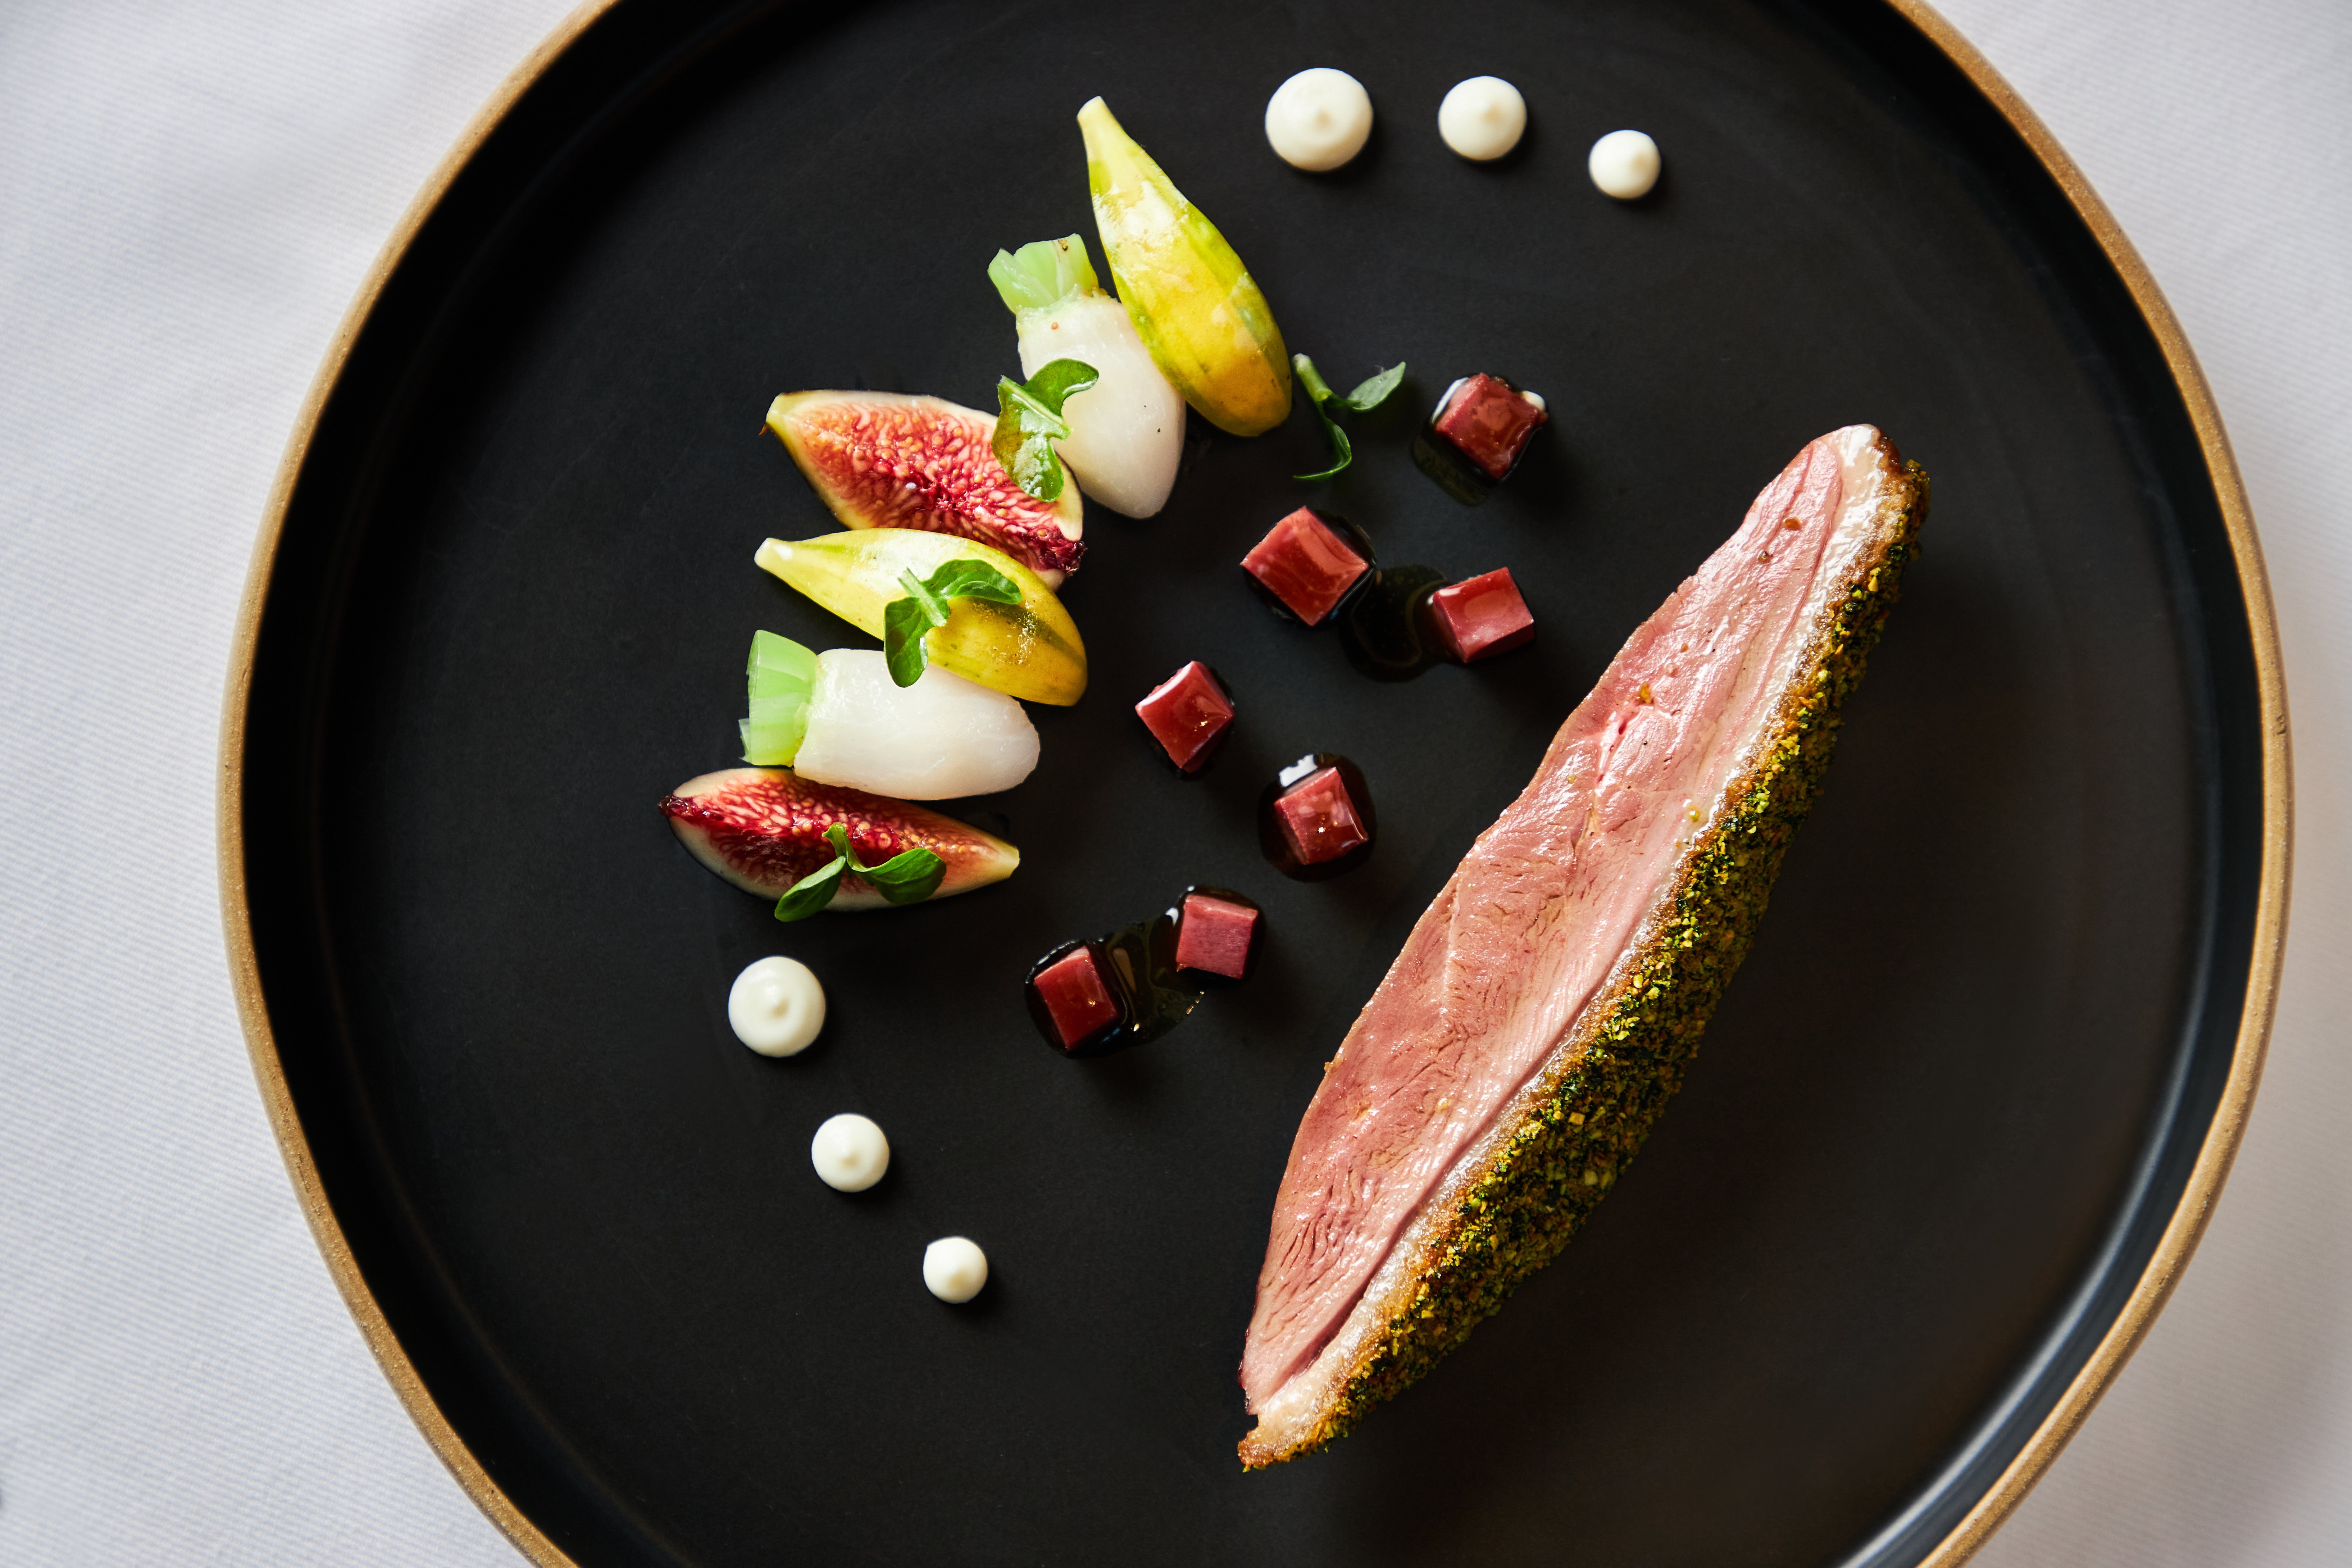 Each Luce dish is prepared with unique local seasonal ingredients.